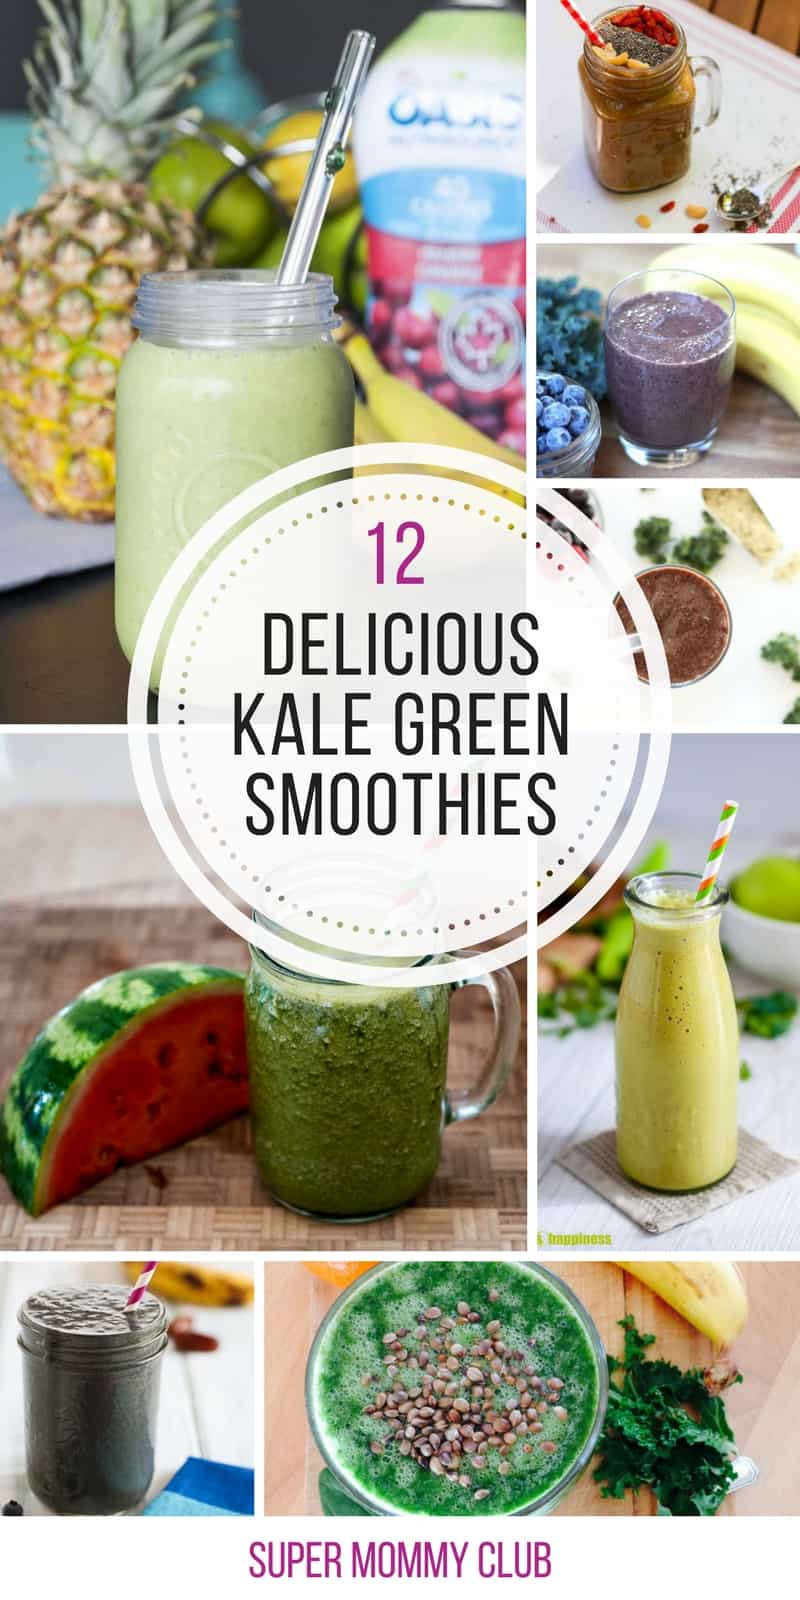 These kale green smoothies are AMAZING - you'd never know there were veggies in there!